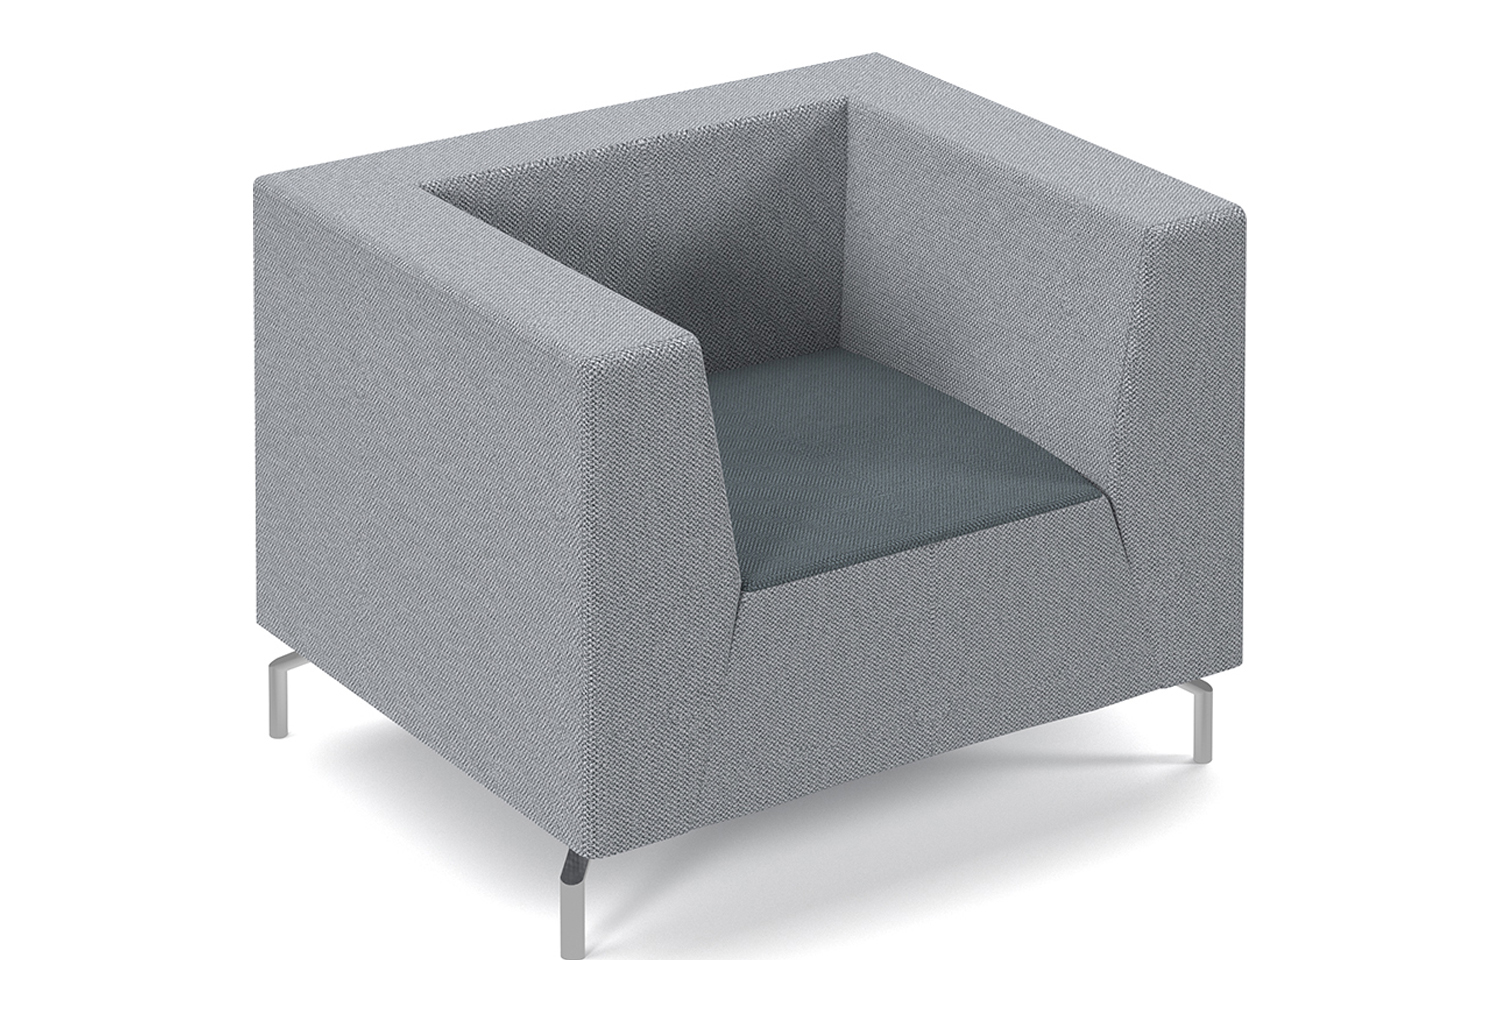 Plato 2 Tone Fabric Low Armchair, Elapse Grey Seat/Late Grey Back, Fully Installed